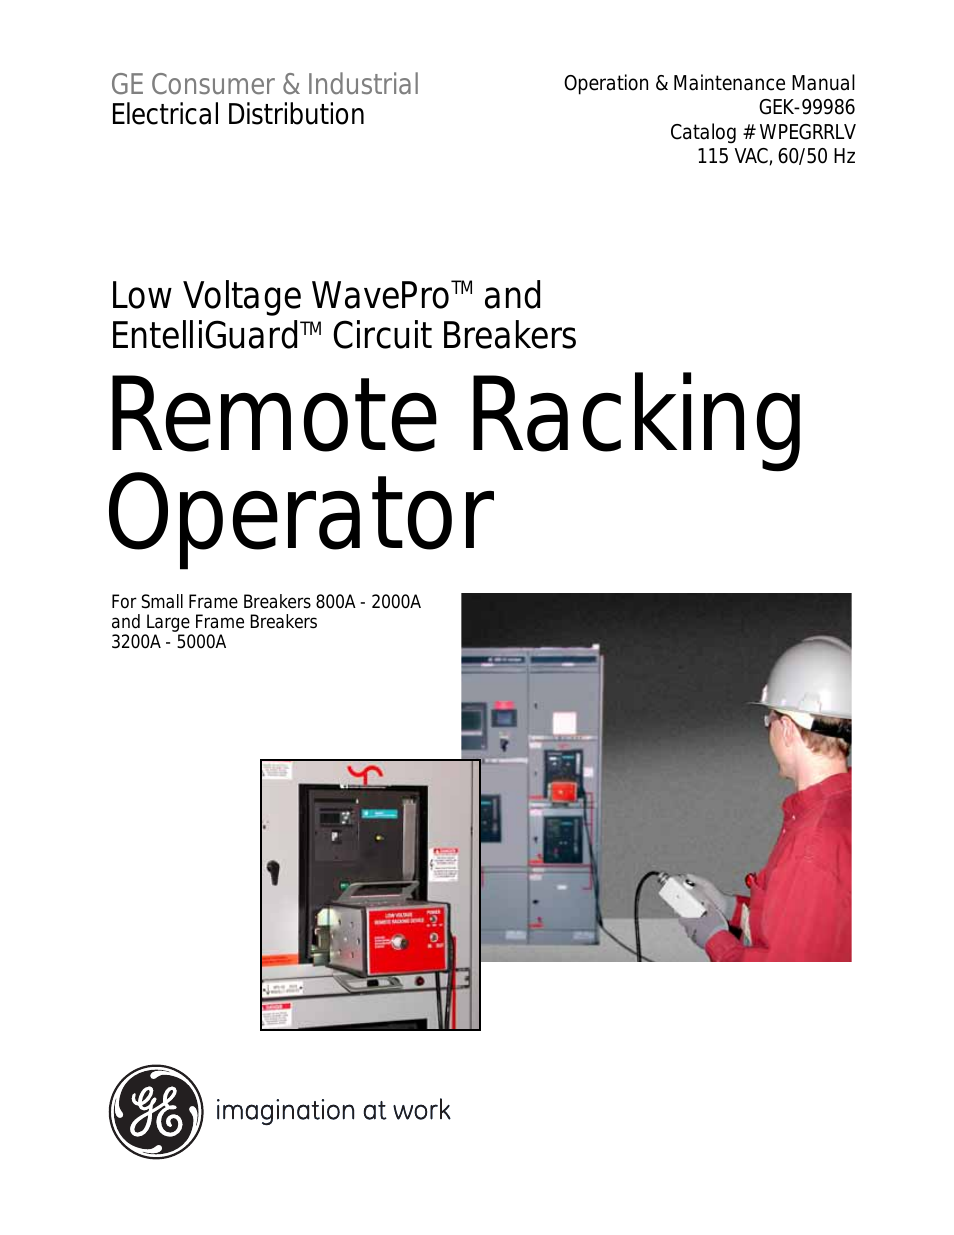 Remote Racking Operator - Low Voltage WavePro and EntelliGuard Circuit Breakers